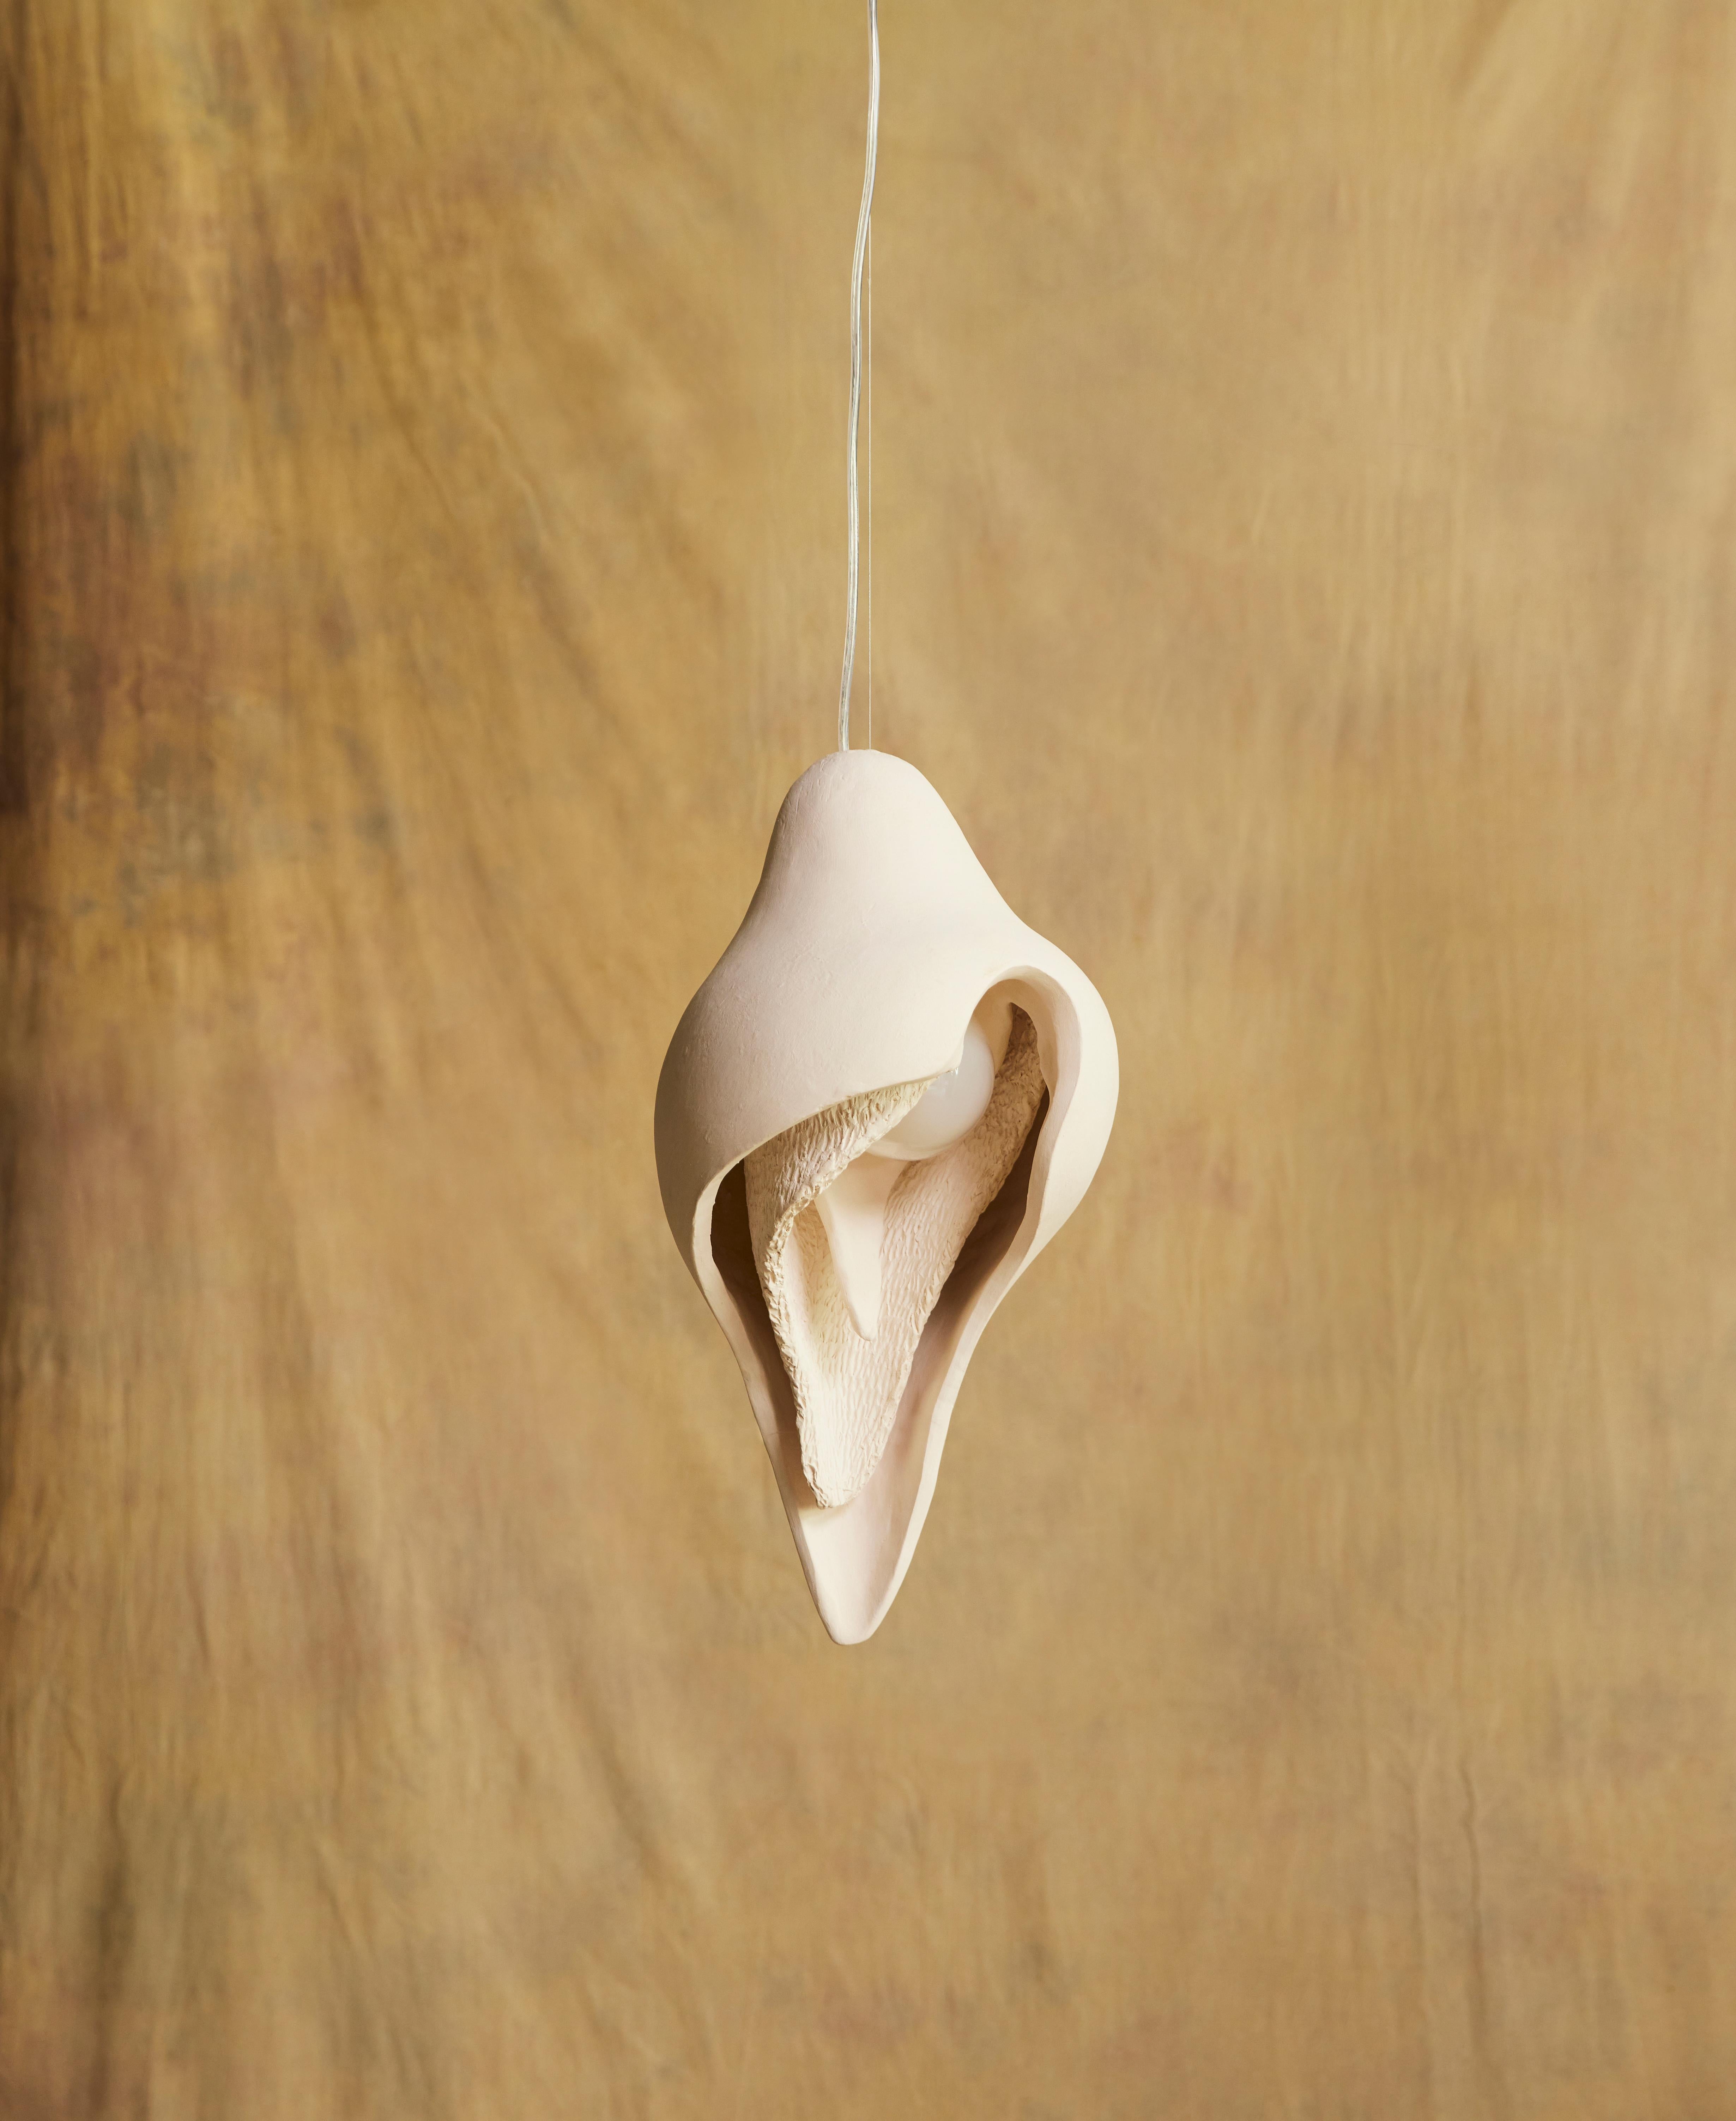 Medium Womb pendant lamp by Jan Ernst
Dimensions: D 25 W 25 H 48 cm
Materials: White stoneware


The Origin Collection is a collaboration between Jan Ernst and Colin Braye. The work translates the complexity and delicacy of biological and